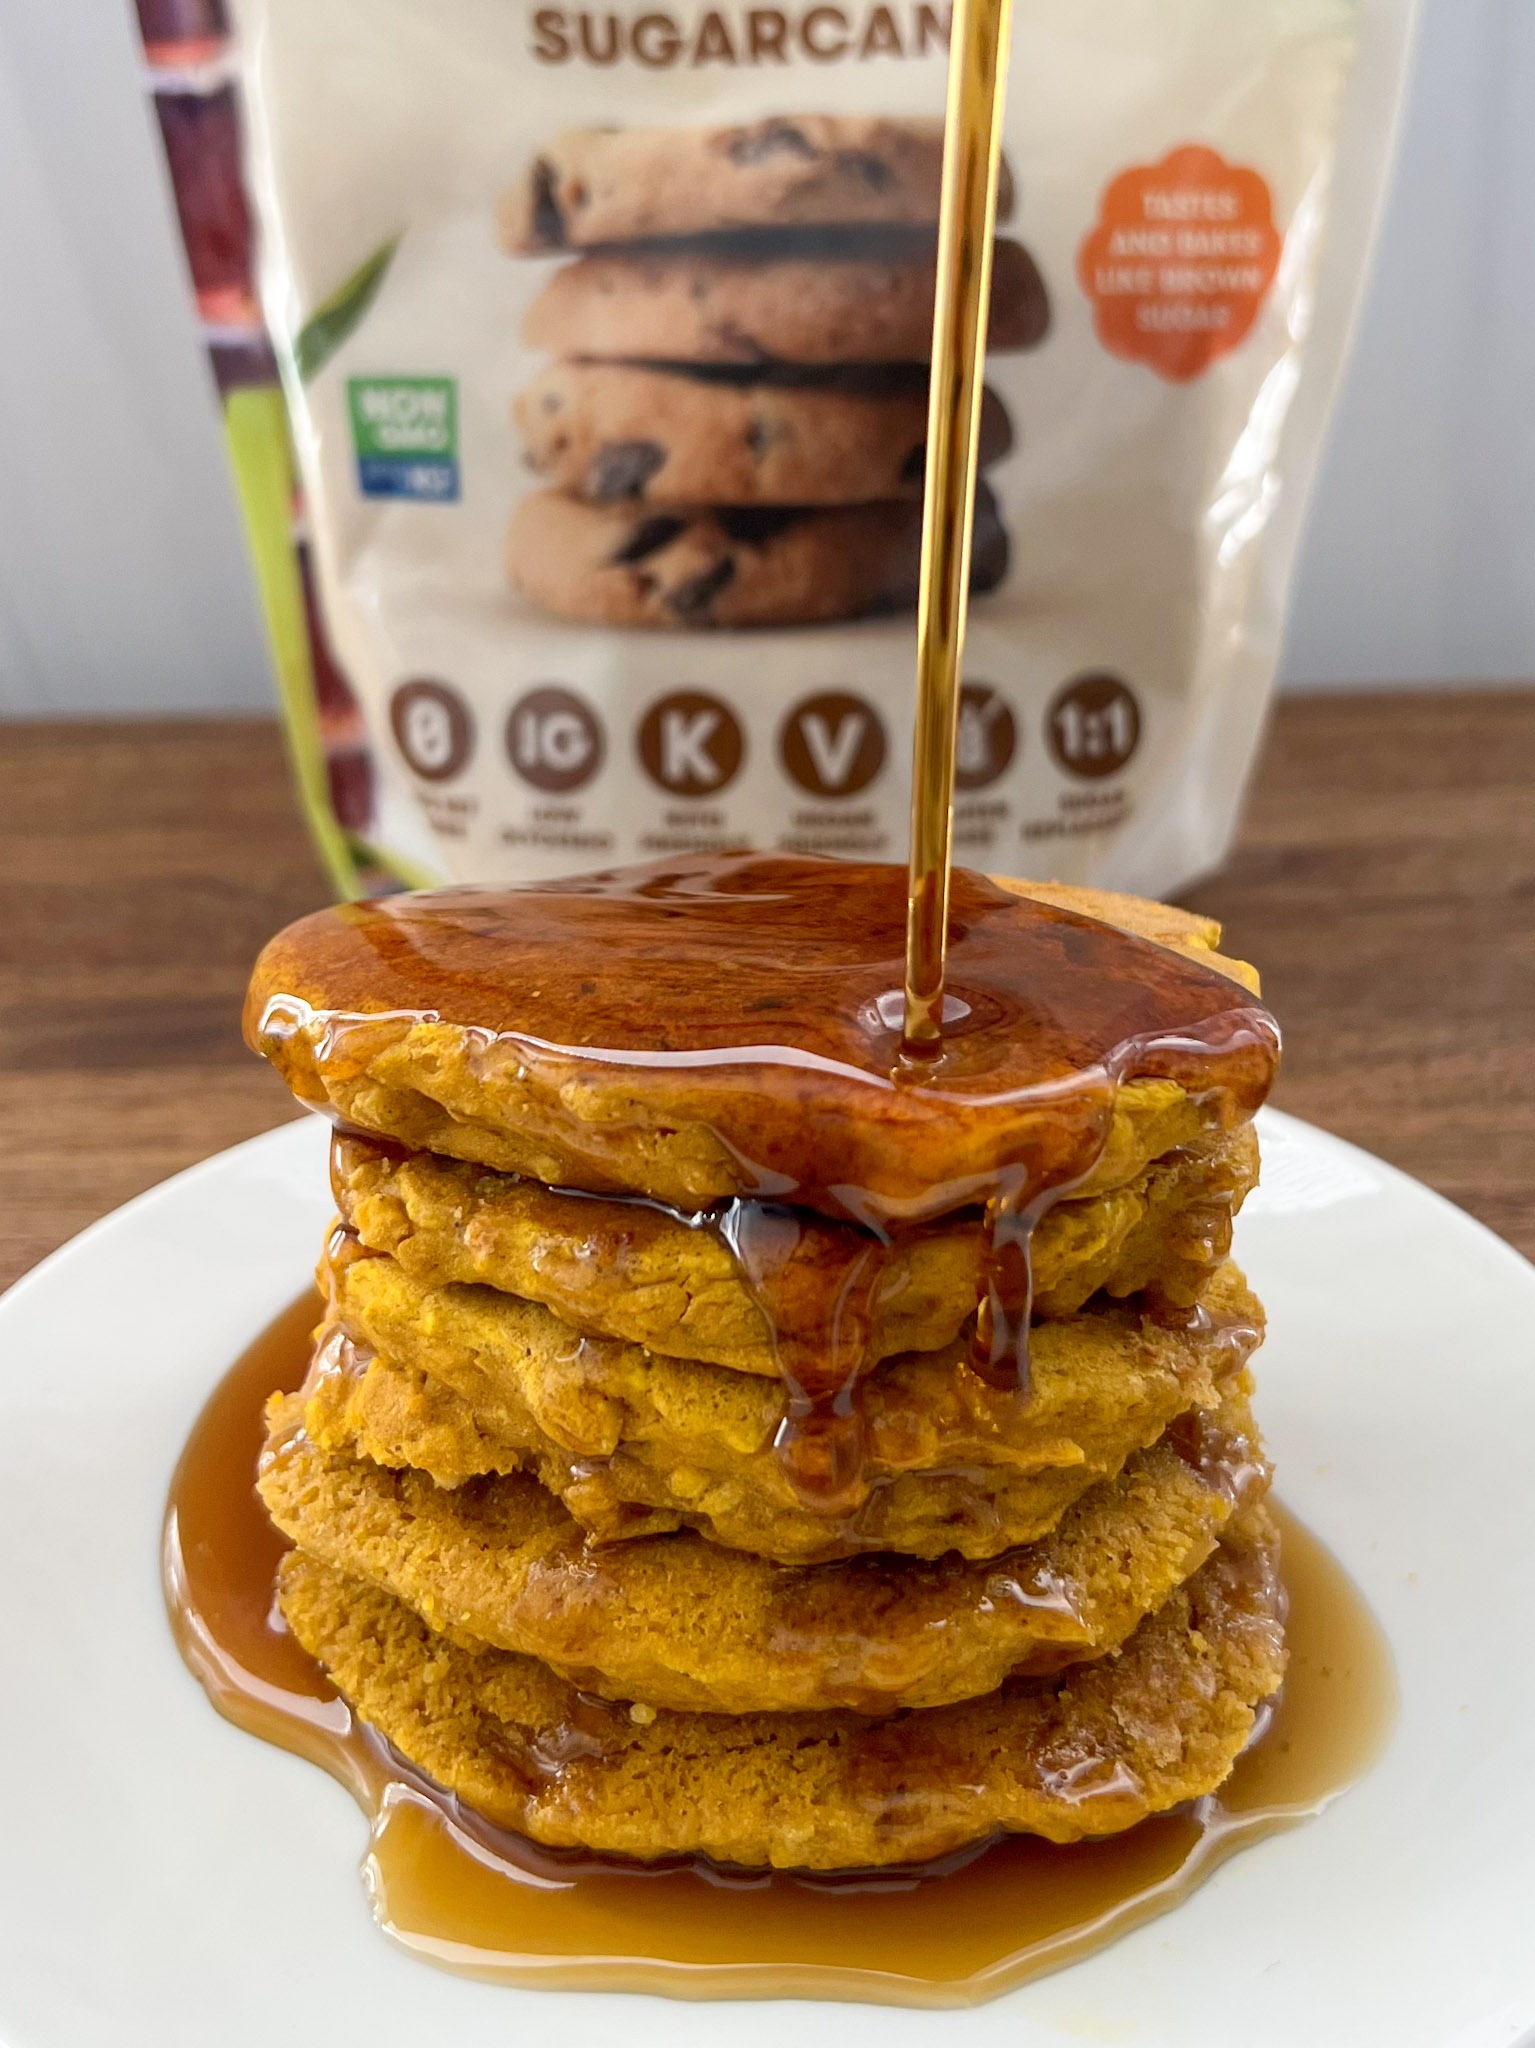 Everyone in your home is going to love these healthy Sweet Potato Pancakes. They taste as good as they look and you only need a handful of ingredients and about 20 minutes to make. We use oats in place of the regular flour in this recipe, making these sweet potato pancakes fluffy and filling! This recipe is naturally gluten-free, vegan, and can be made with reduced sugar.